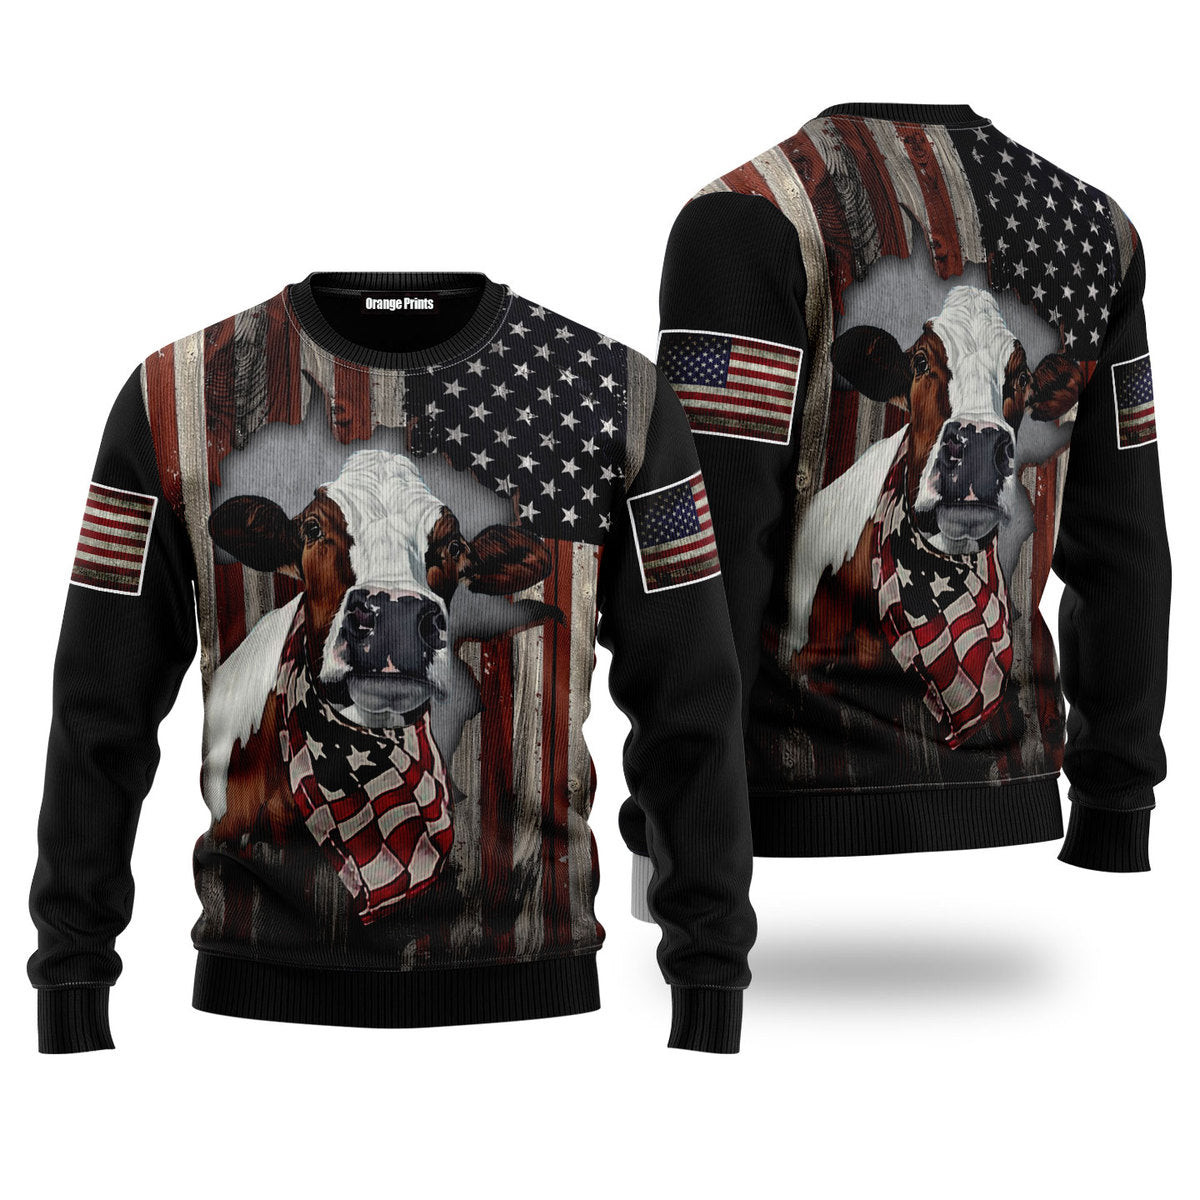 Cow American Flag Patriotic Ugly Christmas Sweater Ugly Sweater For Men Women, Holiday Sweater